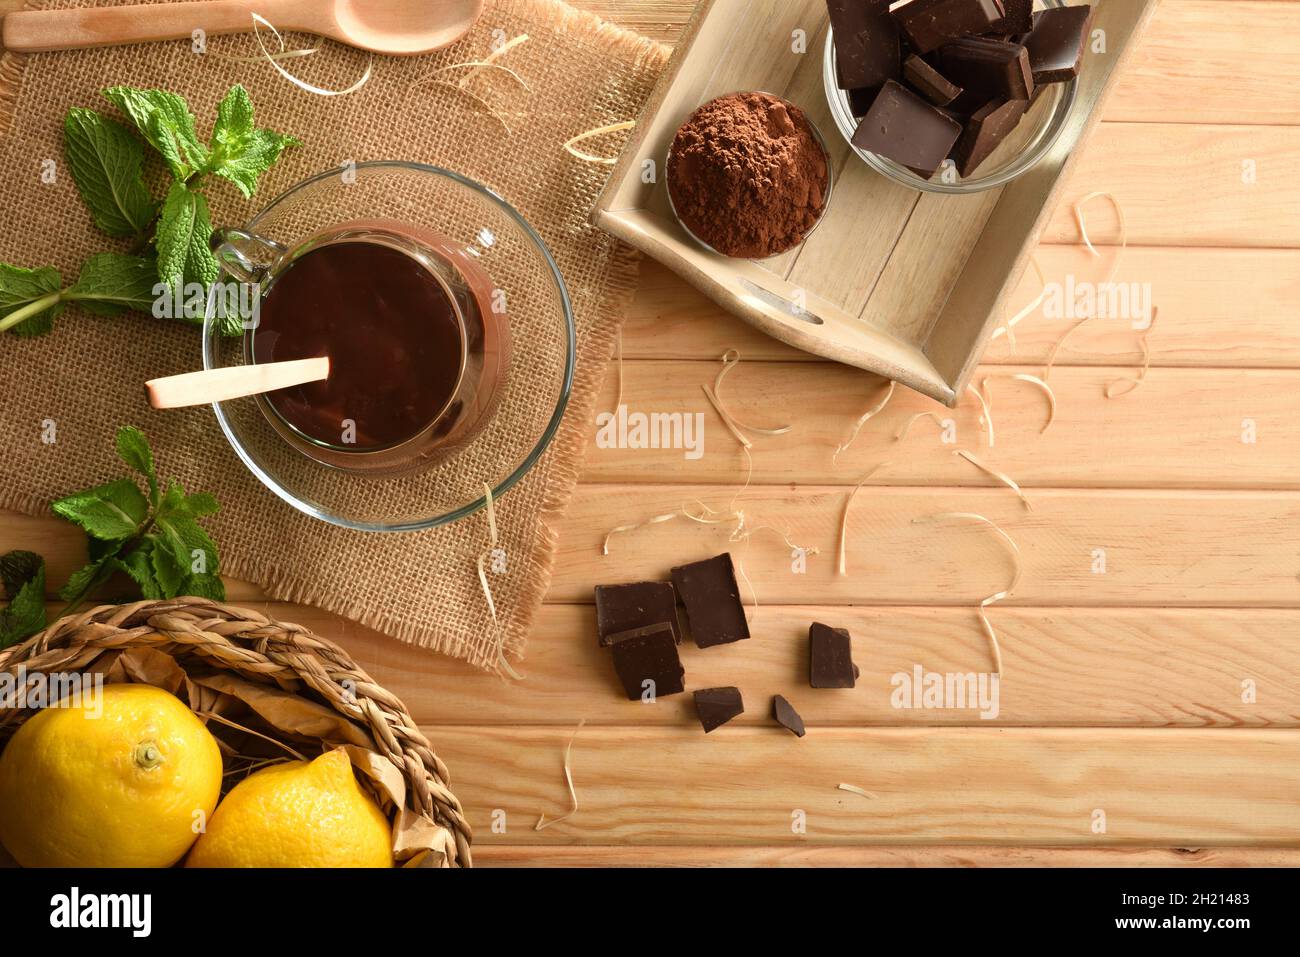 Hot chocolate cream in glass cup on wooden slat table with piece and chocolate powder. Elevated view. Horizontal composition. Stock Photo